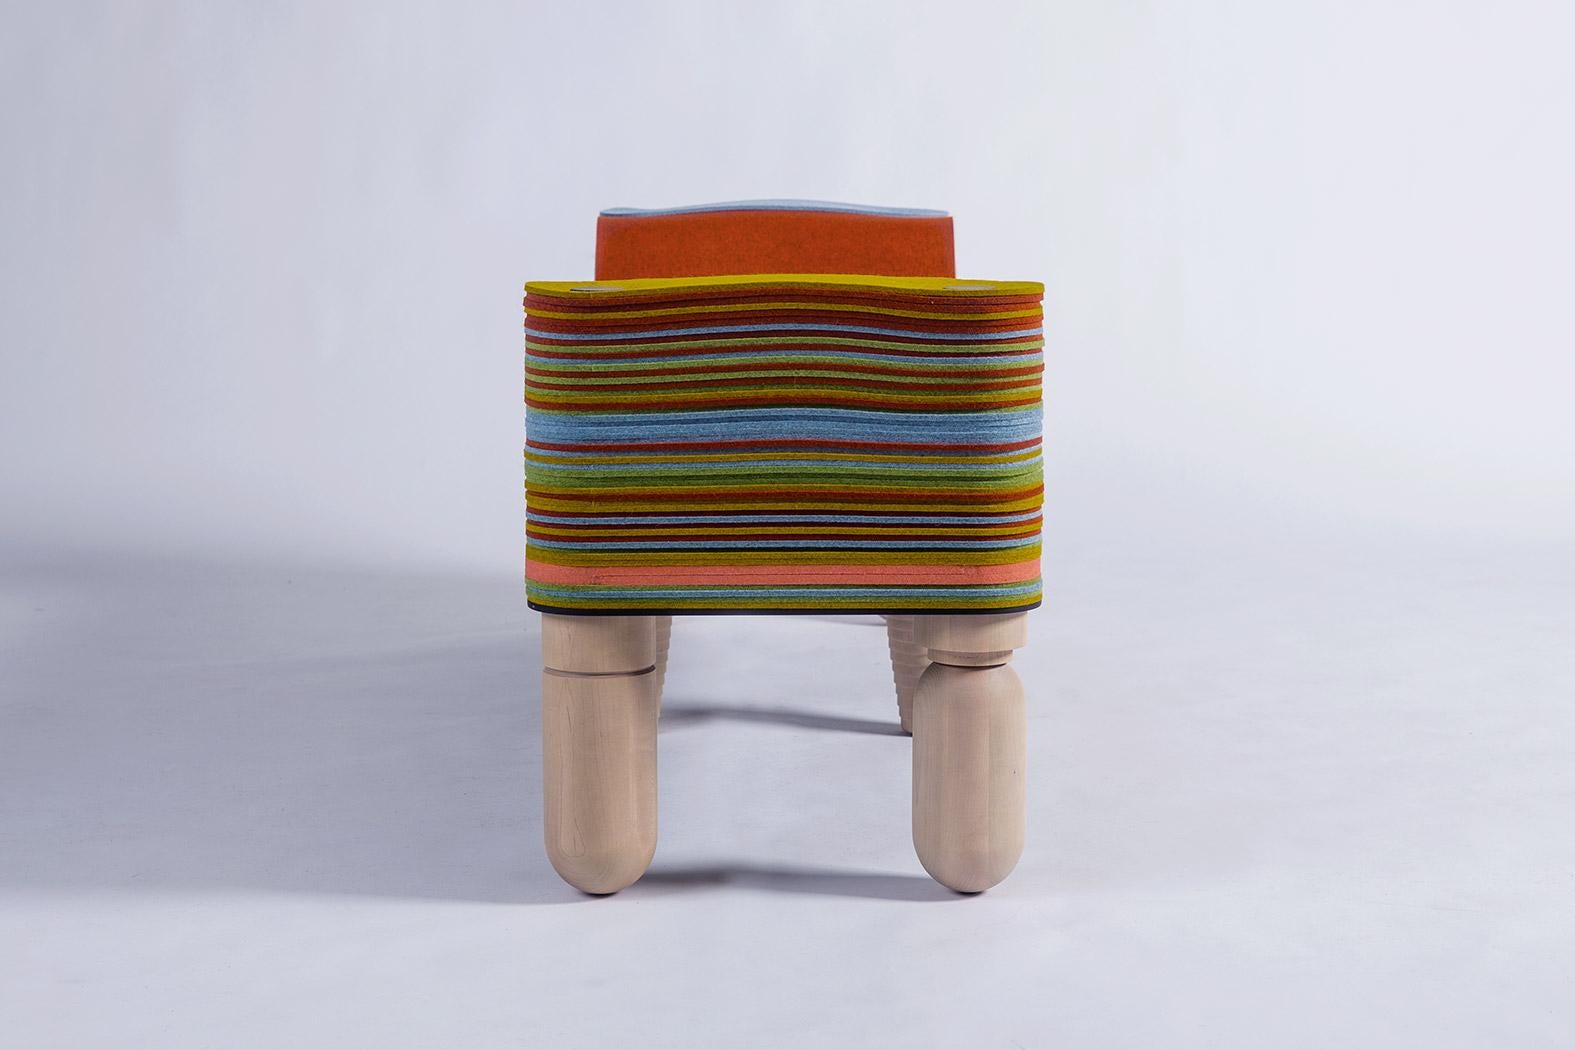 Contemporary Maxine D, Felt and Wood Bench, Benoist F. Drut in STACKABL, Canada, 2021 For Sale